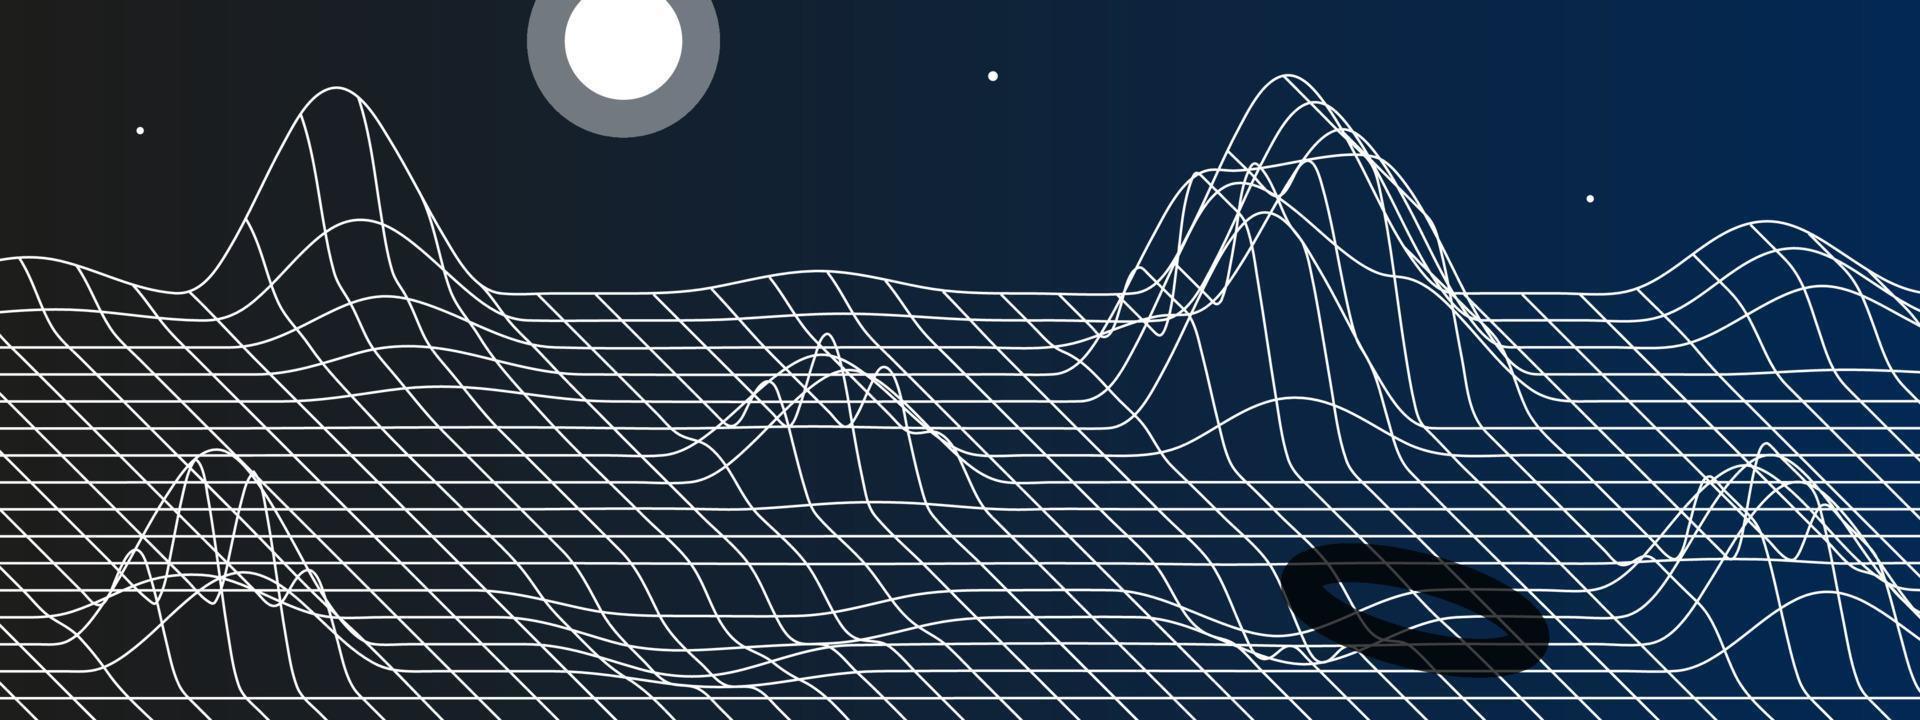 Digital space landscape with mountains, moon and stars. Vector illustration of linear mesh and abstract shape. Perspective grid with convex distortions in the form of mountains. Night background.